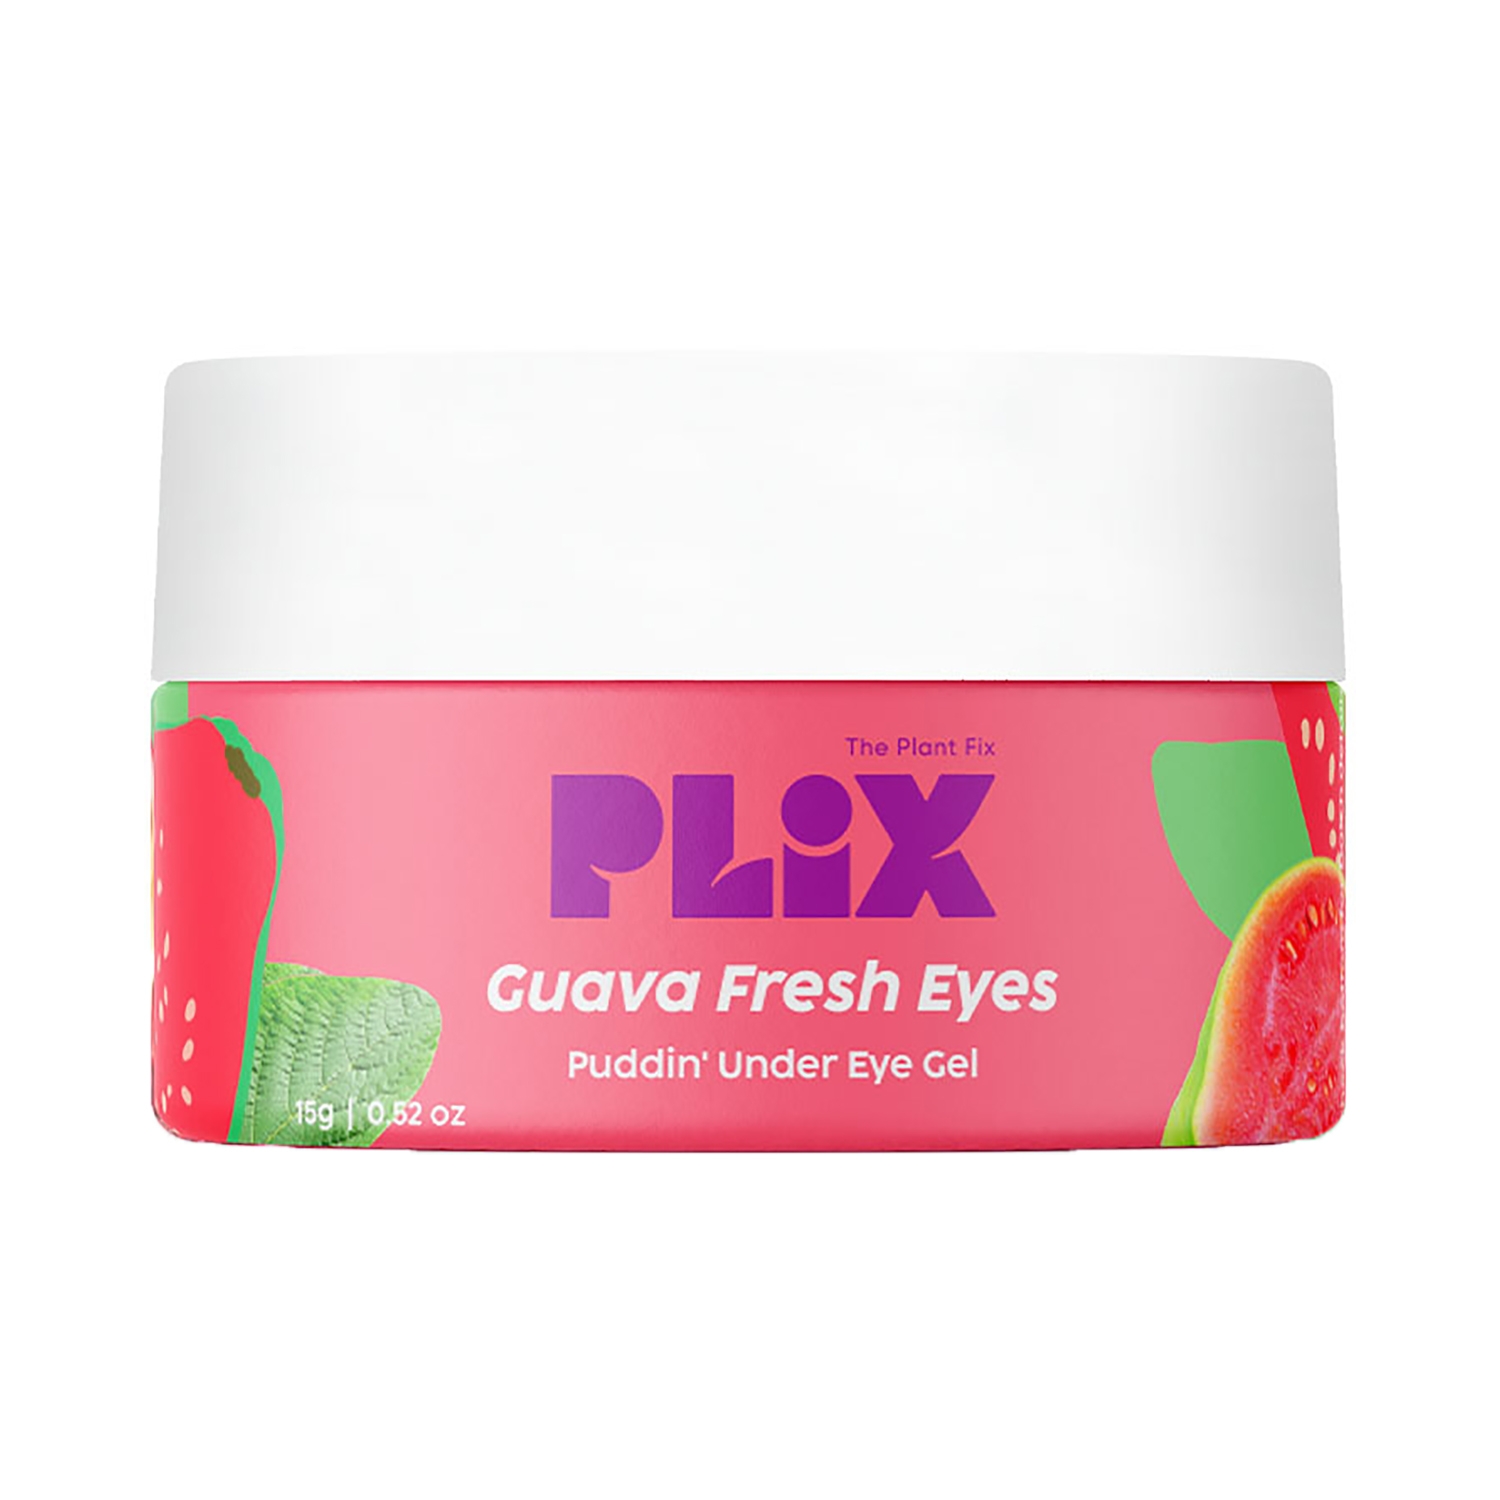 Plix The Plant Fix | Plix The Plant Fix Guava Fresh Eyes Under Eye Gel For Reducing Dark Circles With 3% Niacinamide (15g)